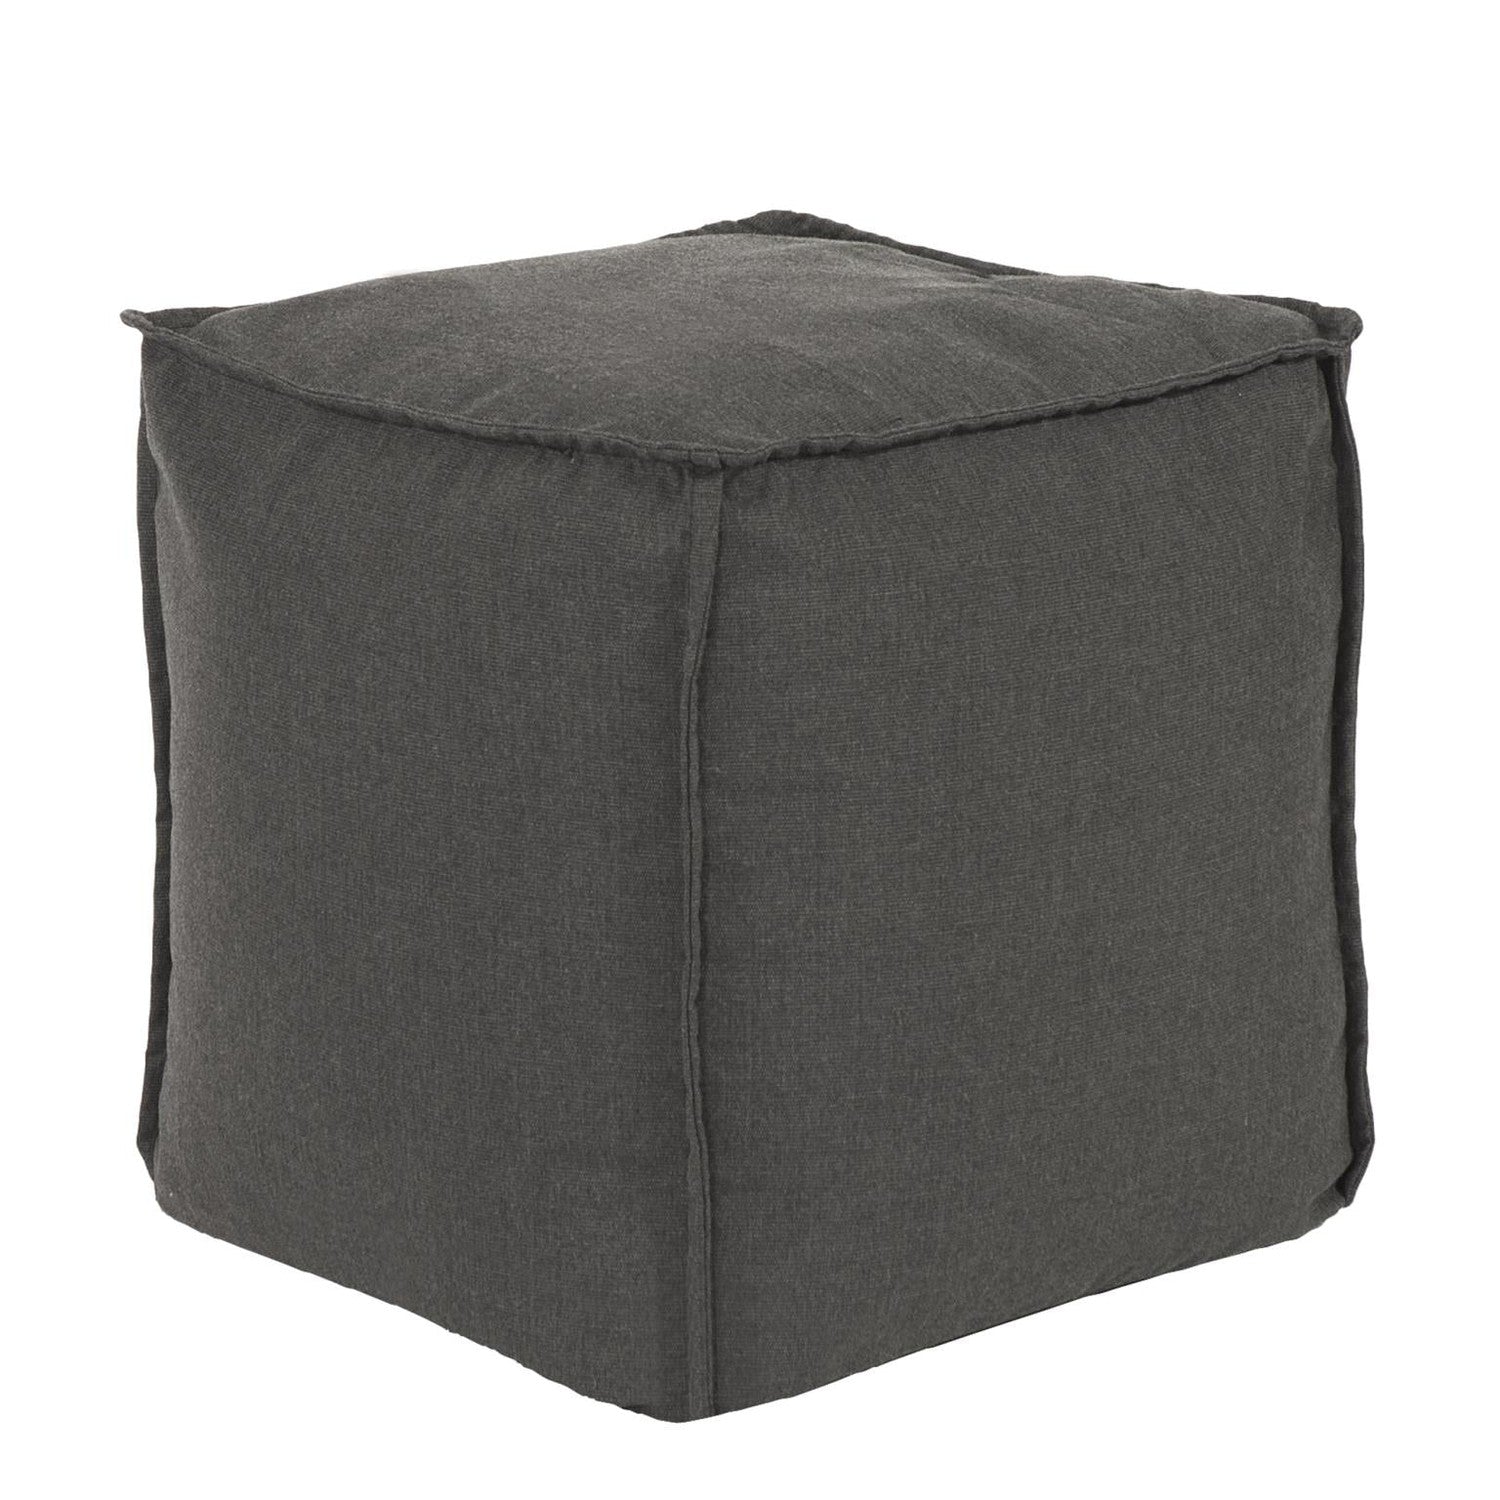 Outdoor Square Pouf-The Howard Elliott Collection-HOWARD-Q873-460-Stools & OttomansCharcoal-Cube Pouf-22-France and Son